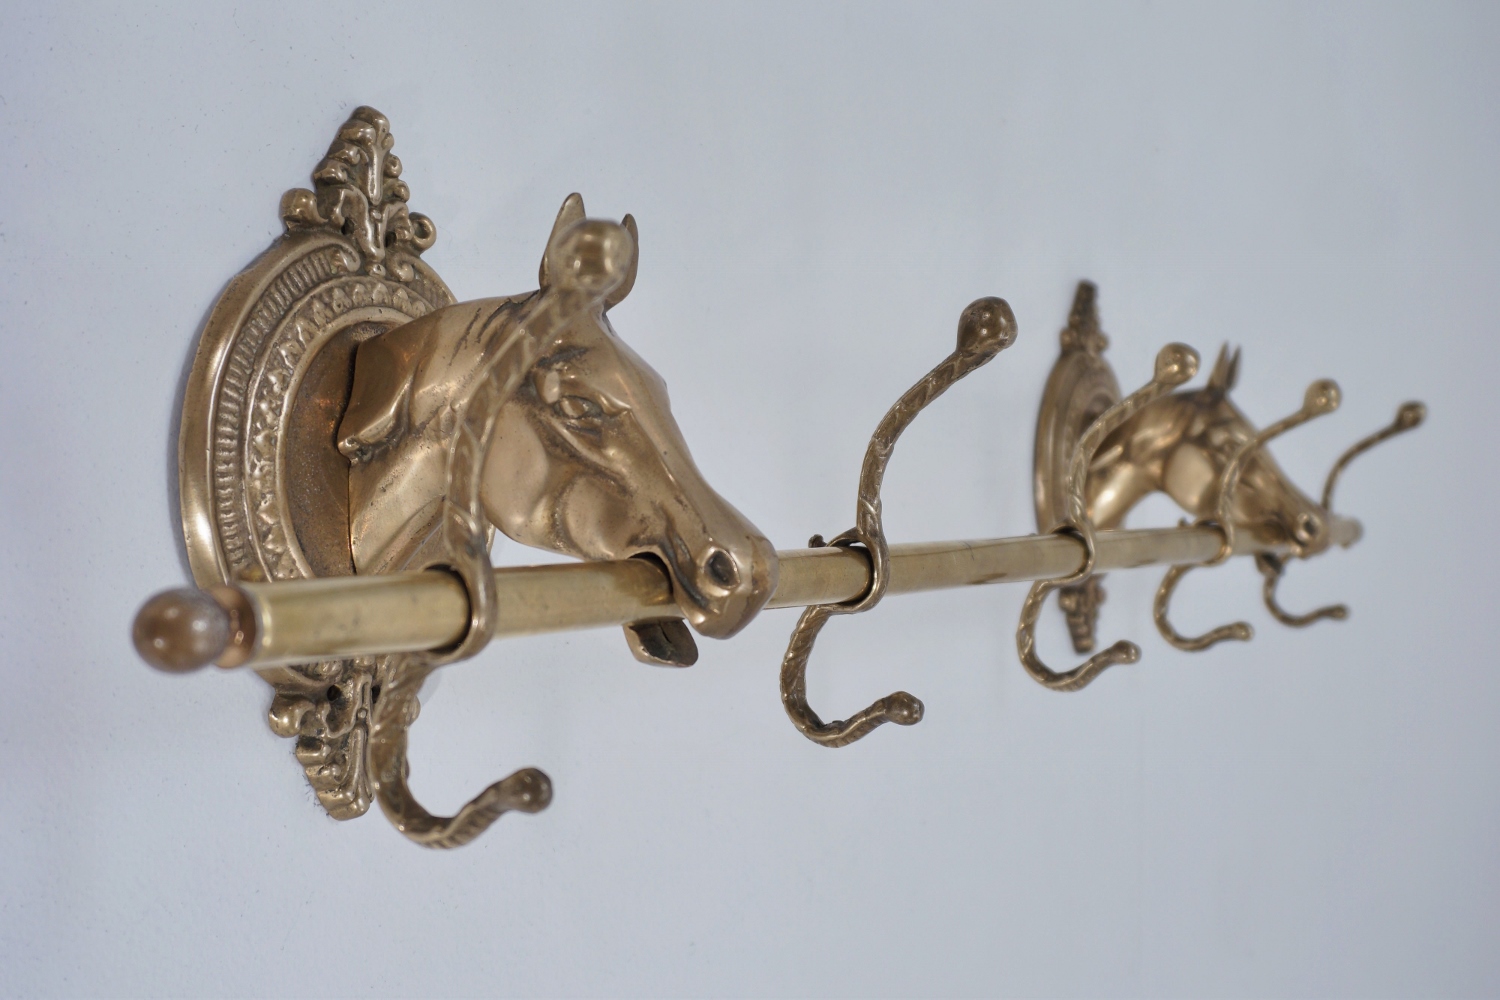 Vintage French Coat Rack in Brass from Maison Charles, 1950s for